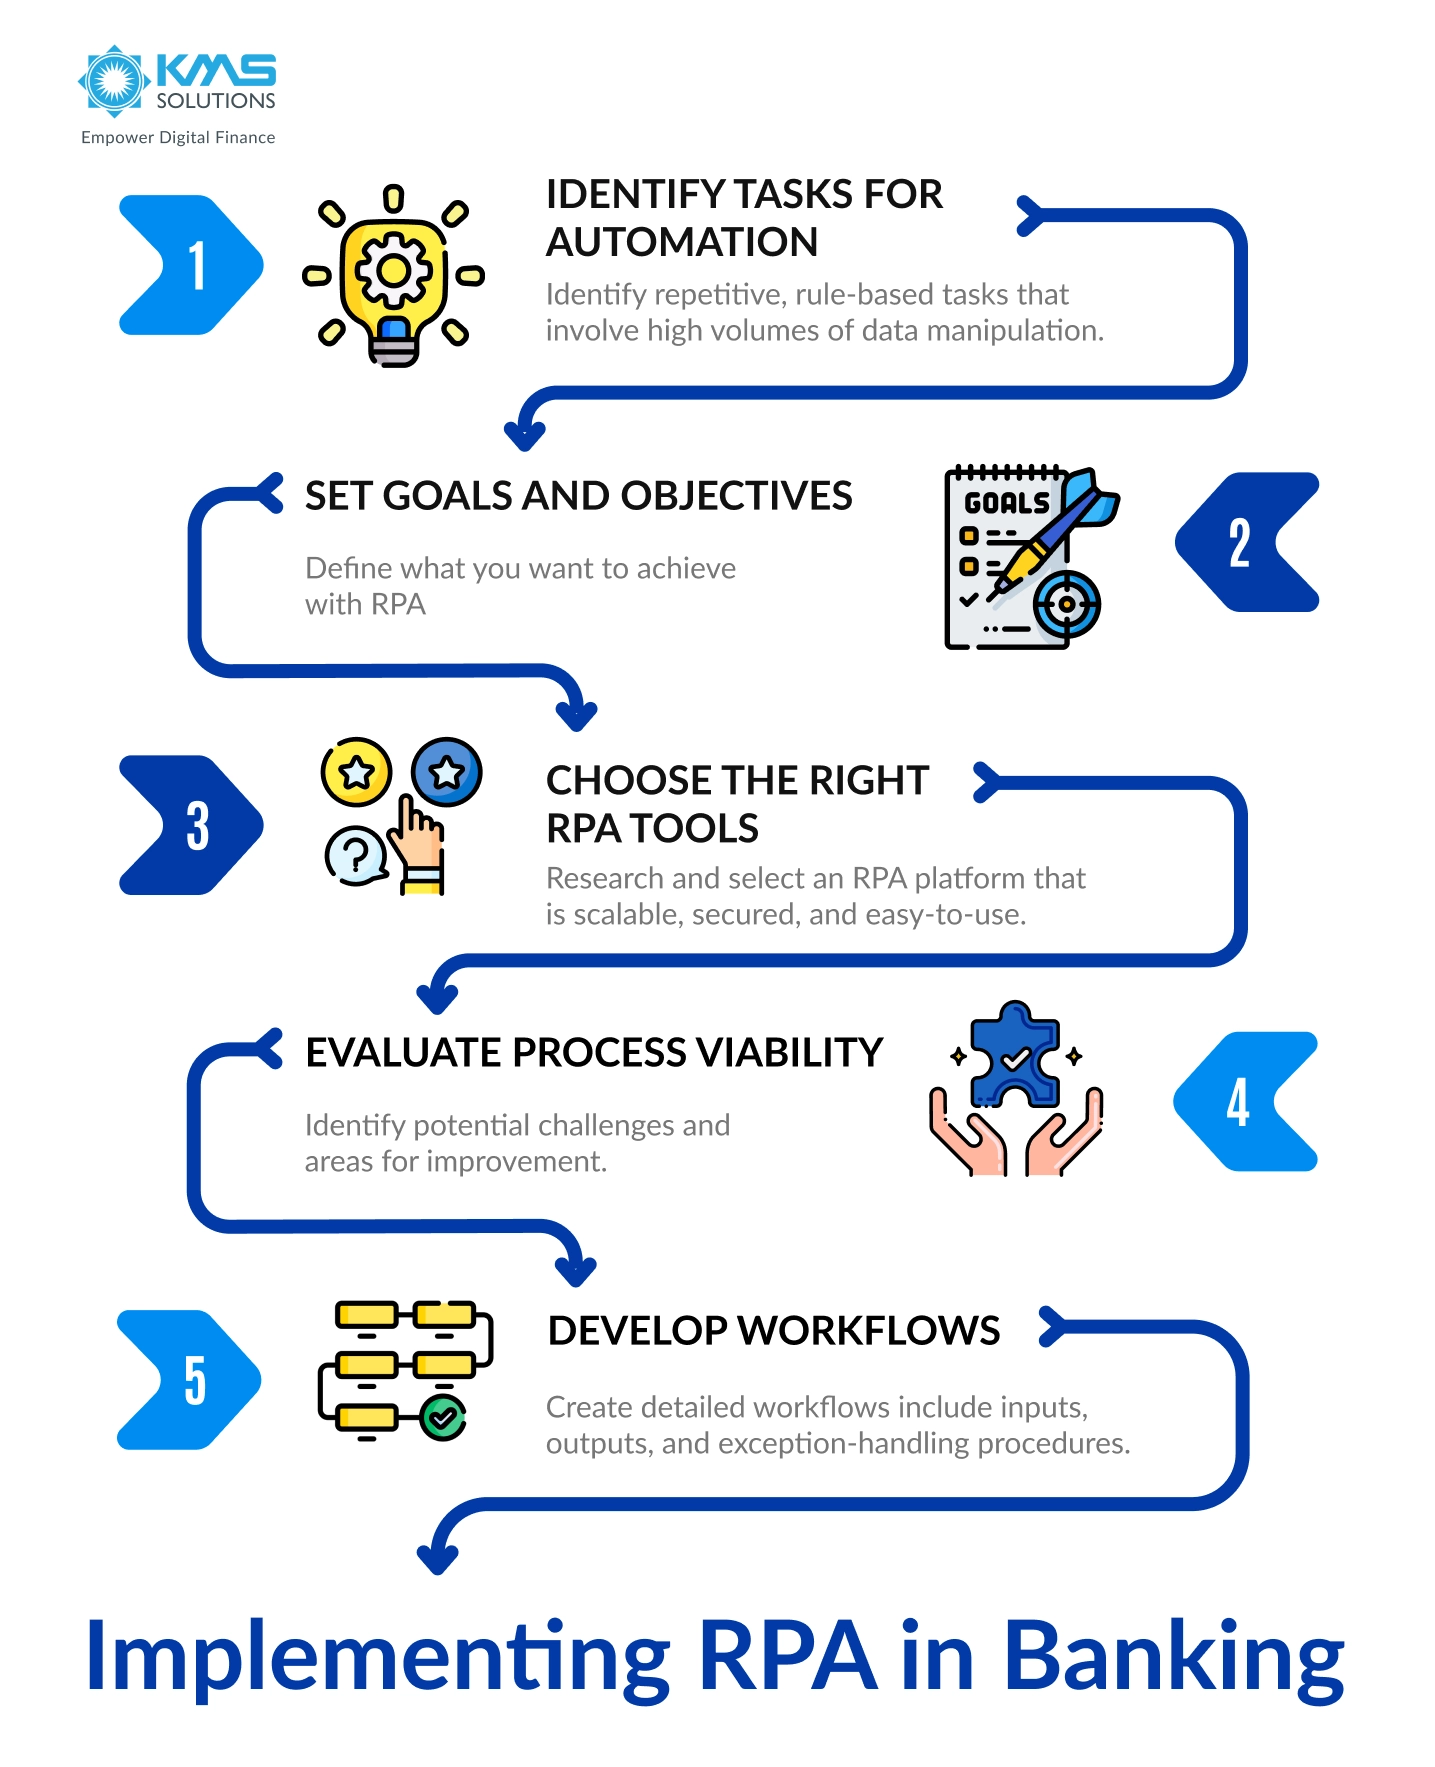 RPA Implementation process